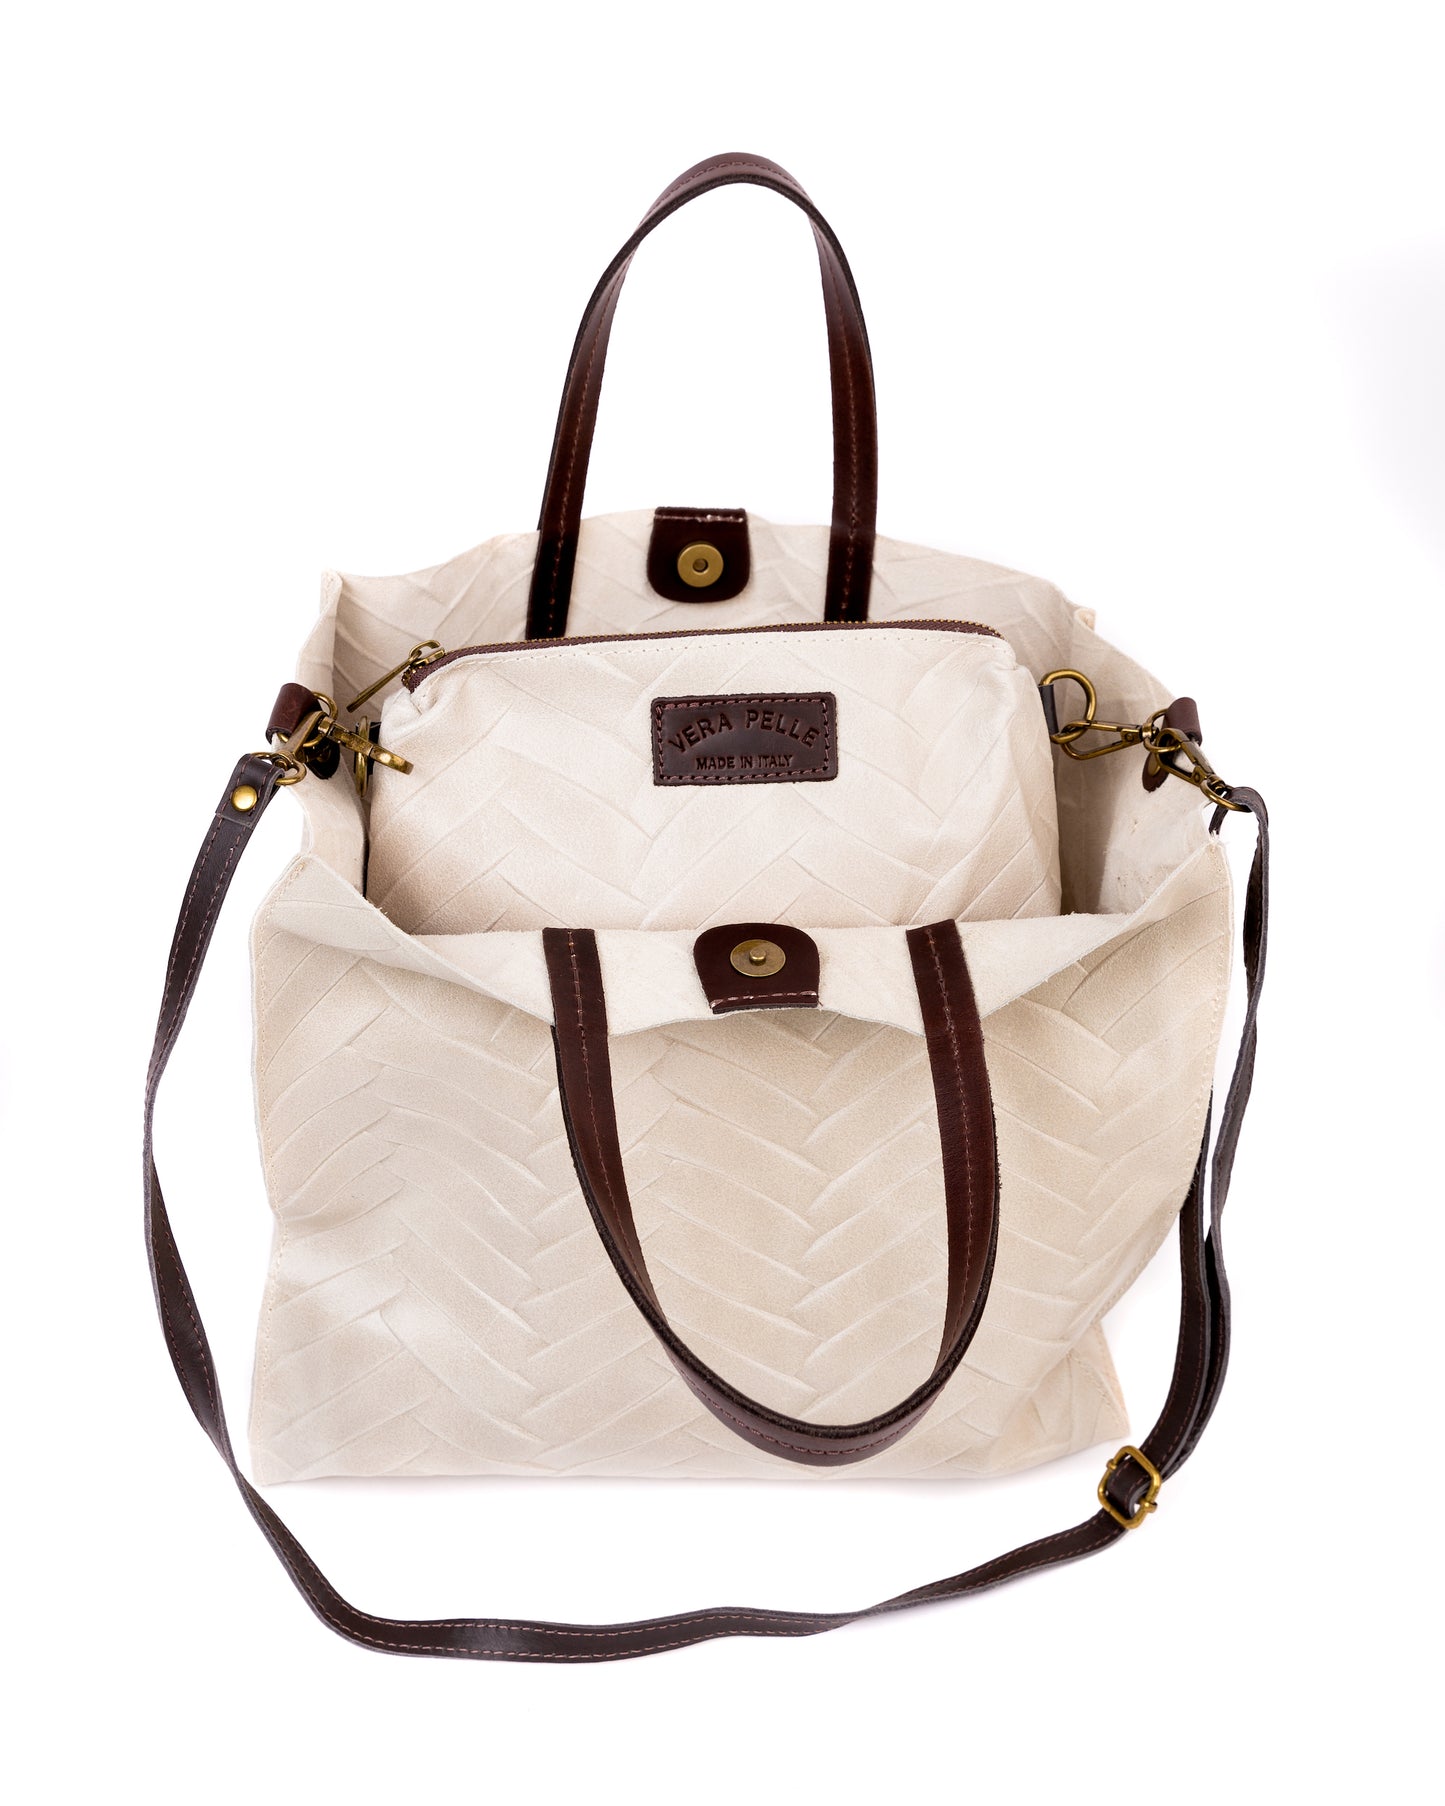 The Vivienne Bag - 30% OFF - Sold Out